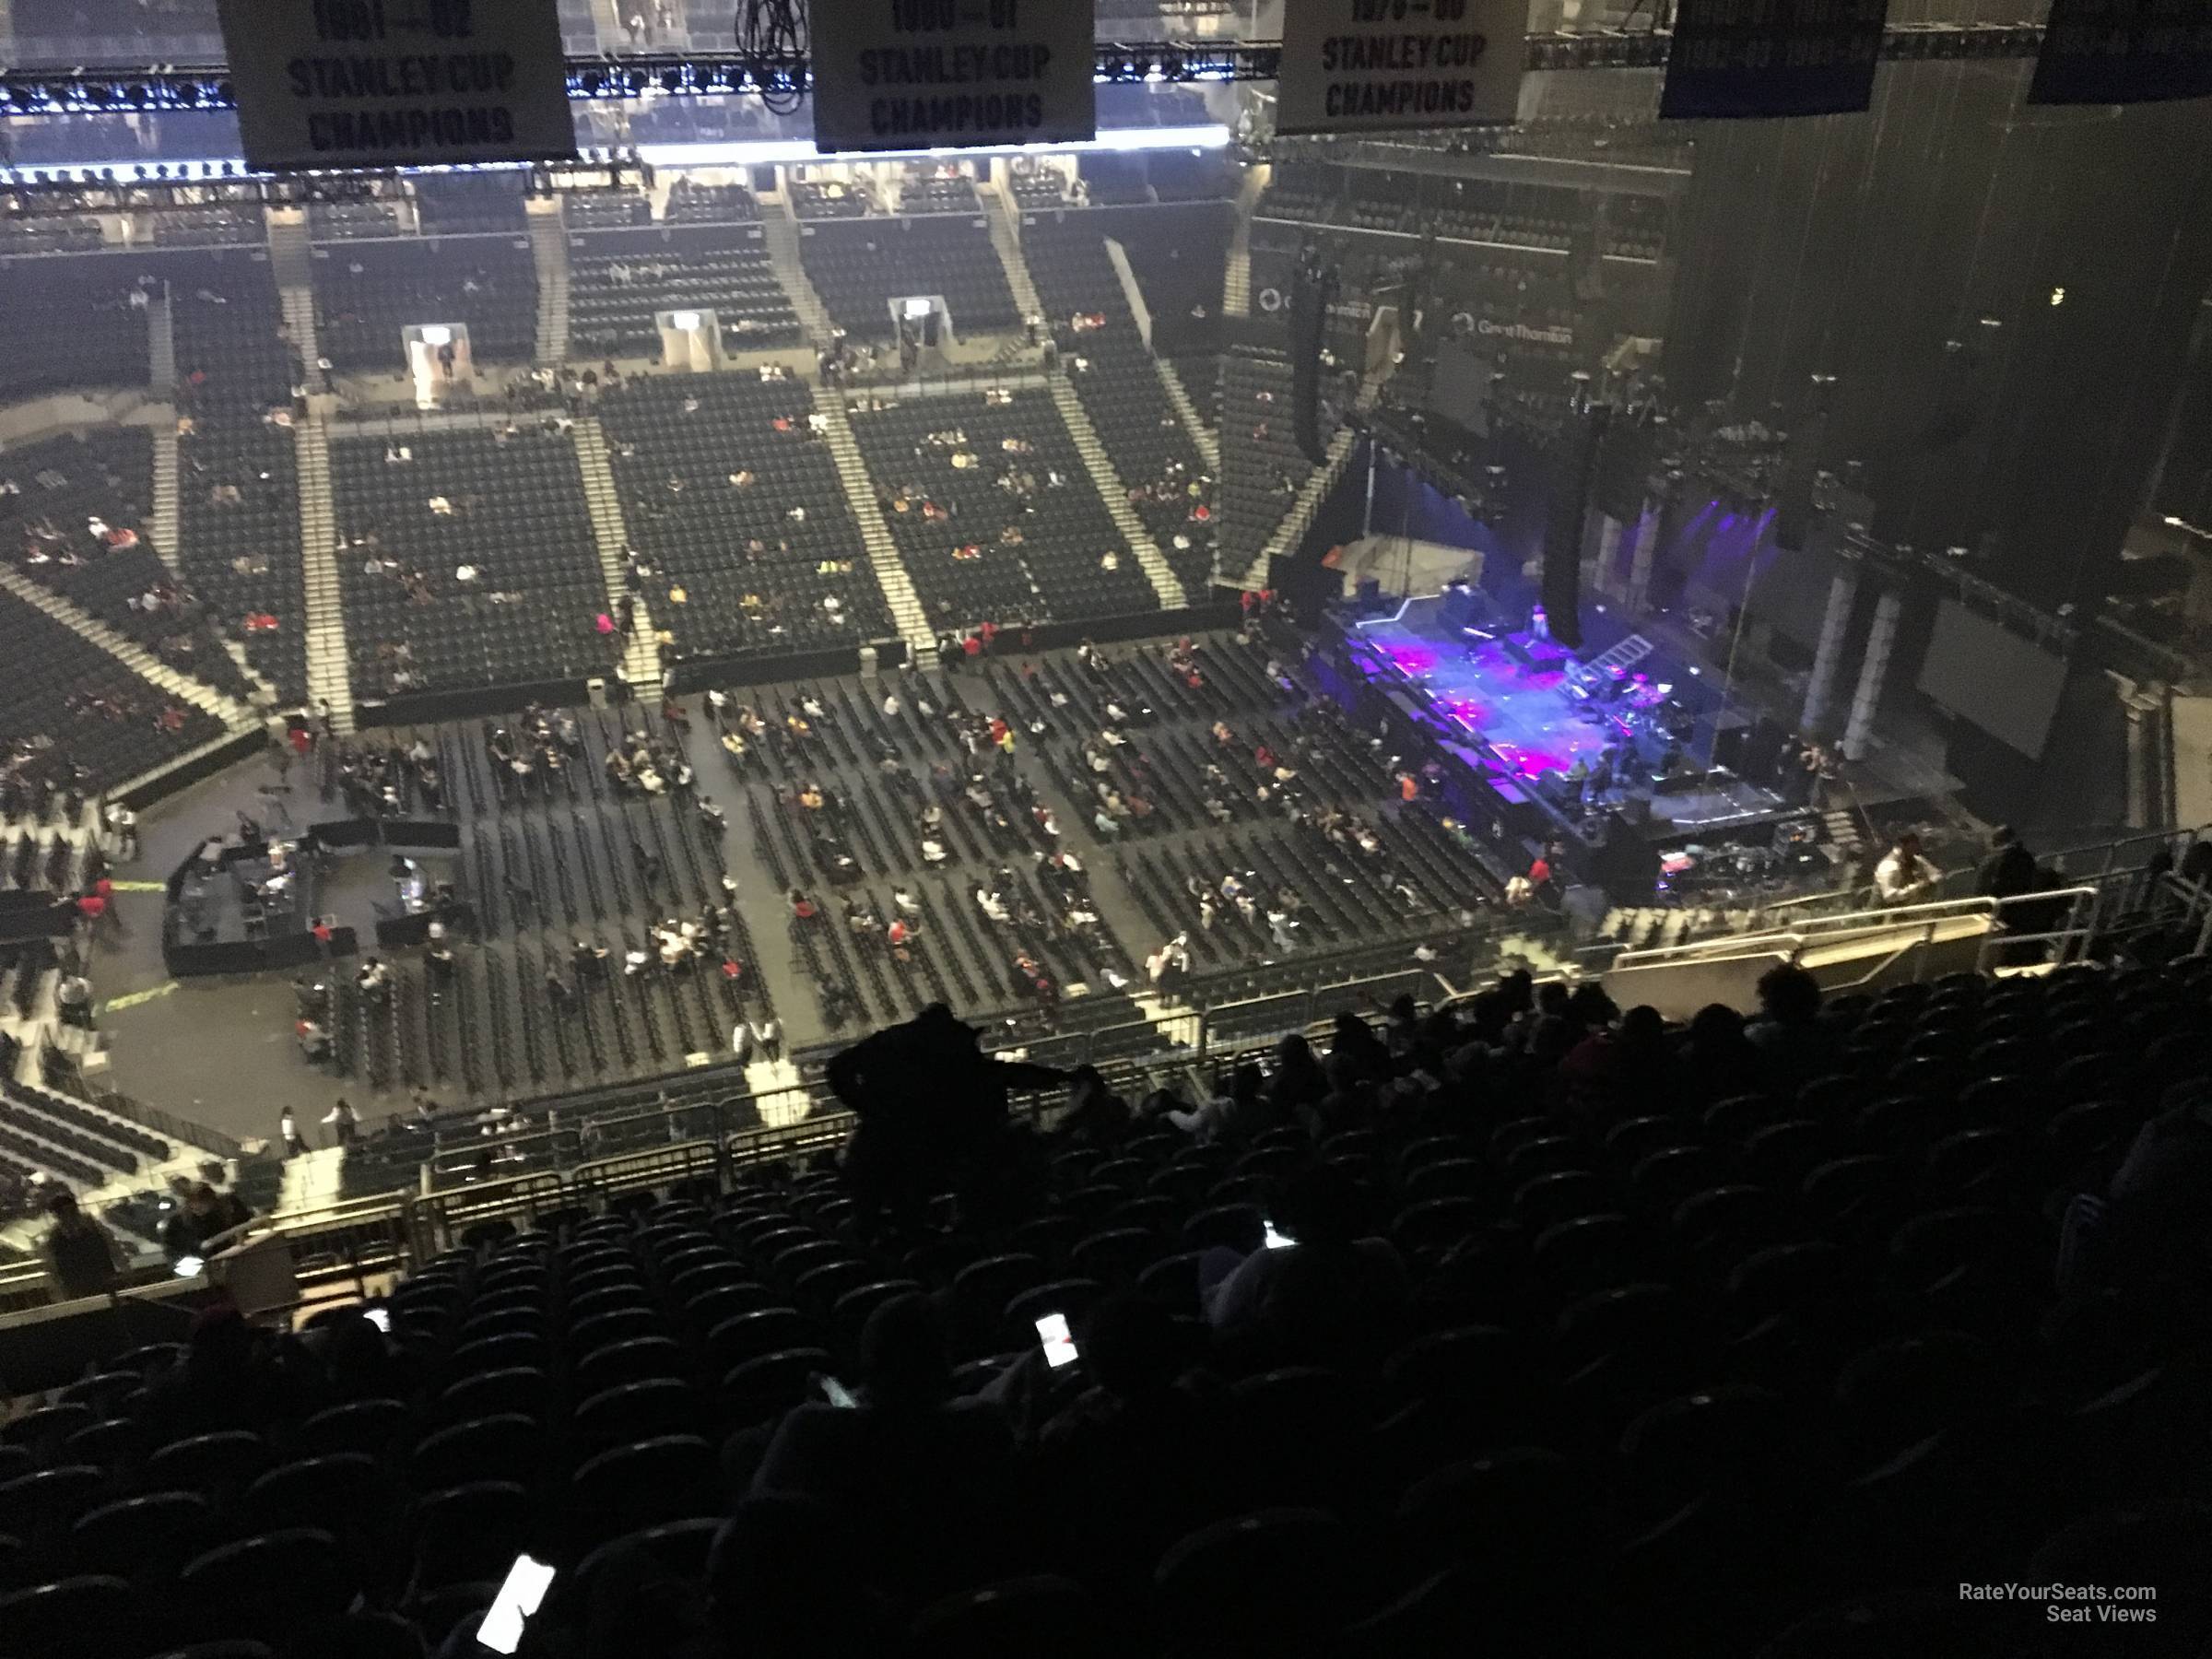 Barclays Center Section 209 Concert Seating - RateYourSeats.com